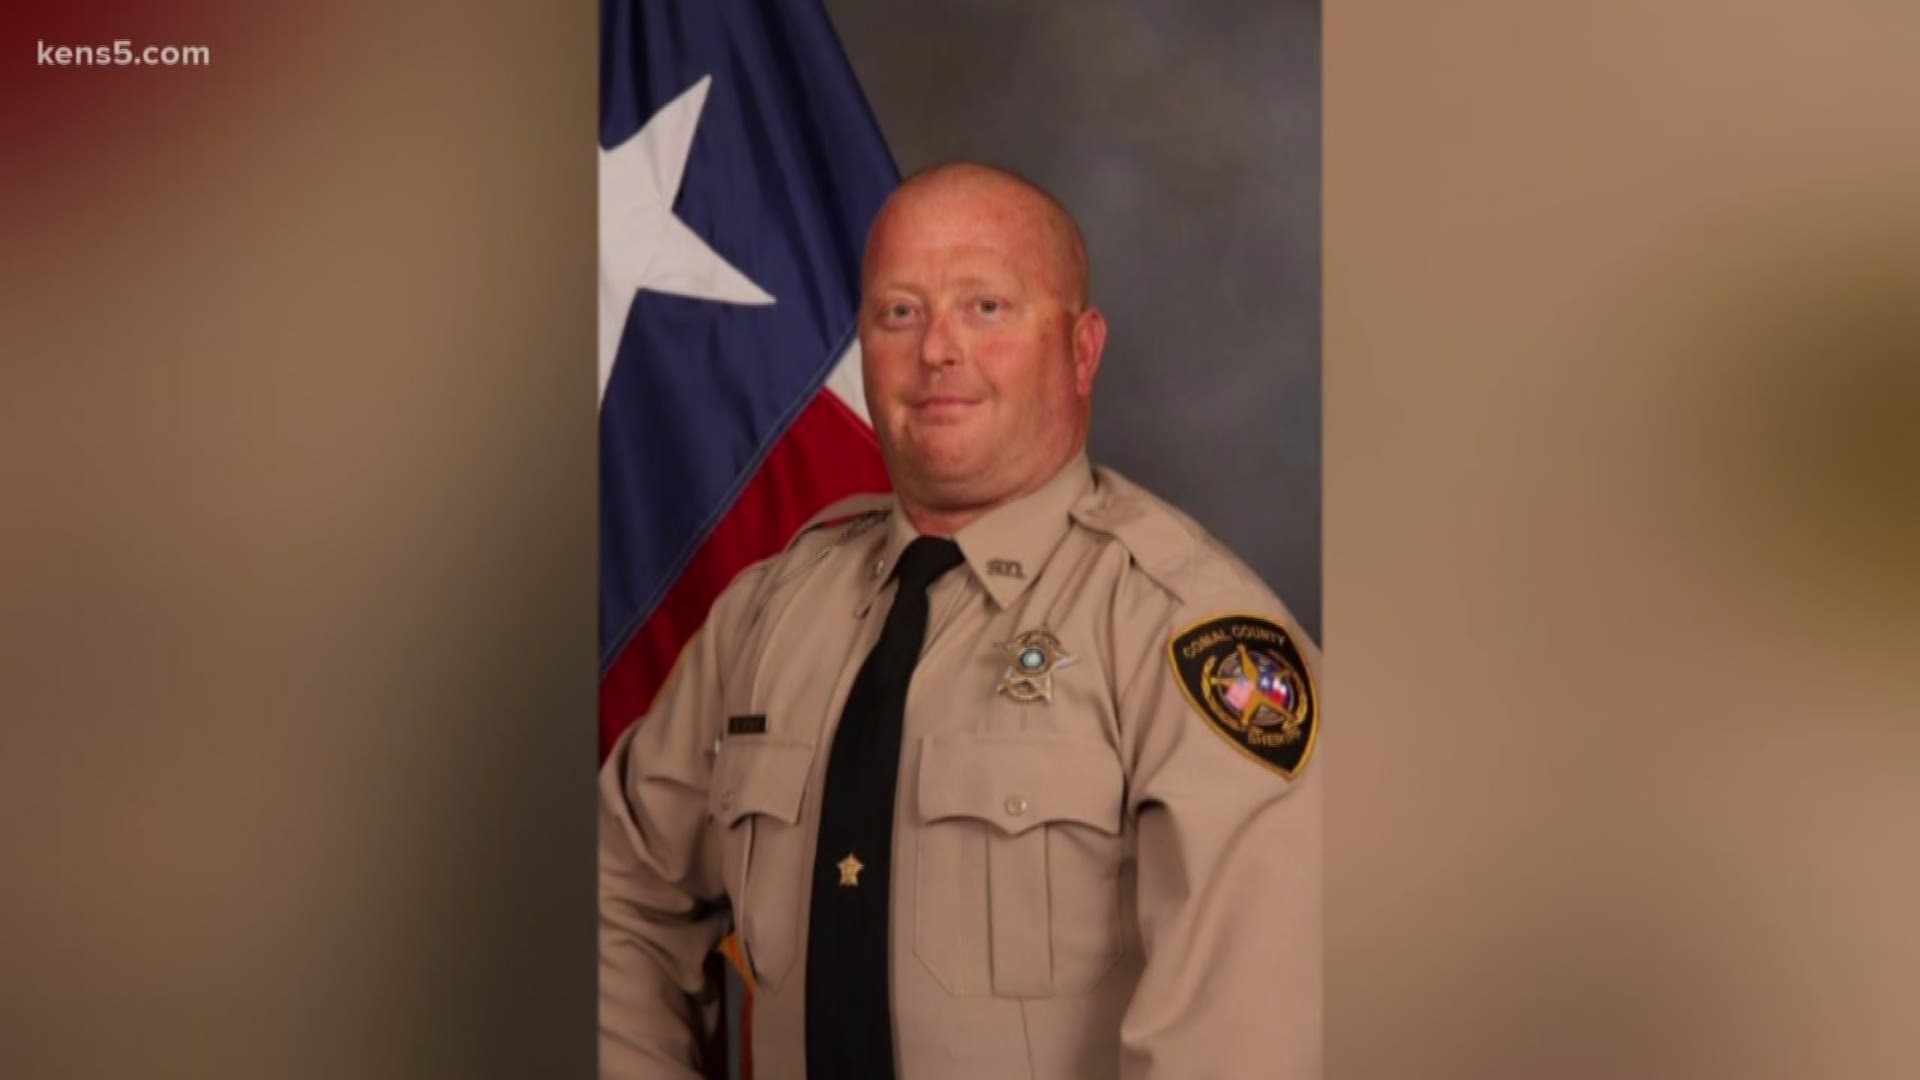 Prayers and notes of sympathy are pouring in for a Comal County Sheriff's deputy killed in a car crash.